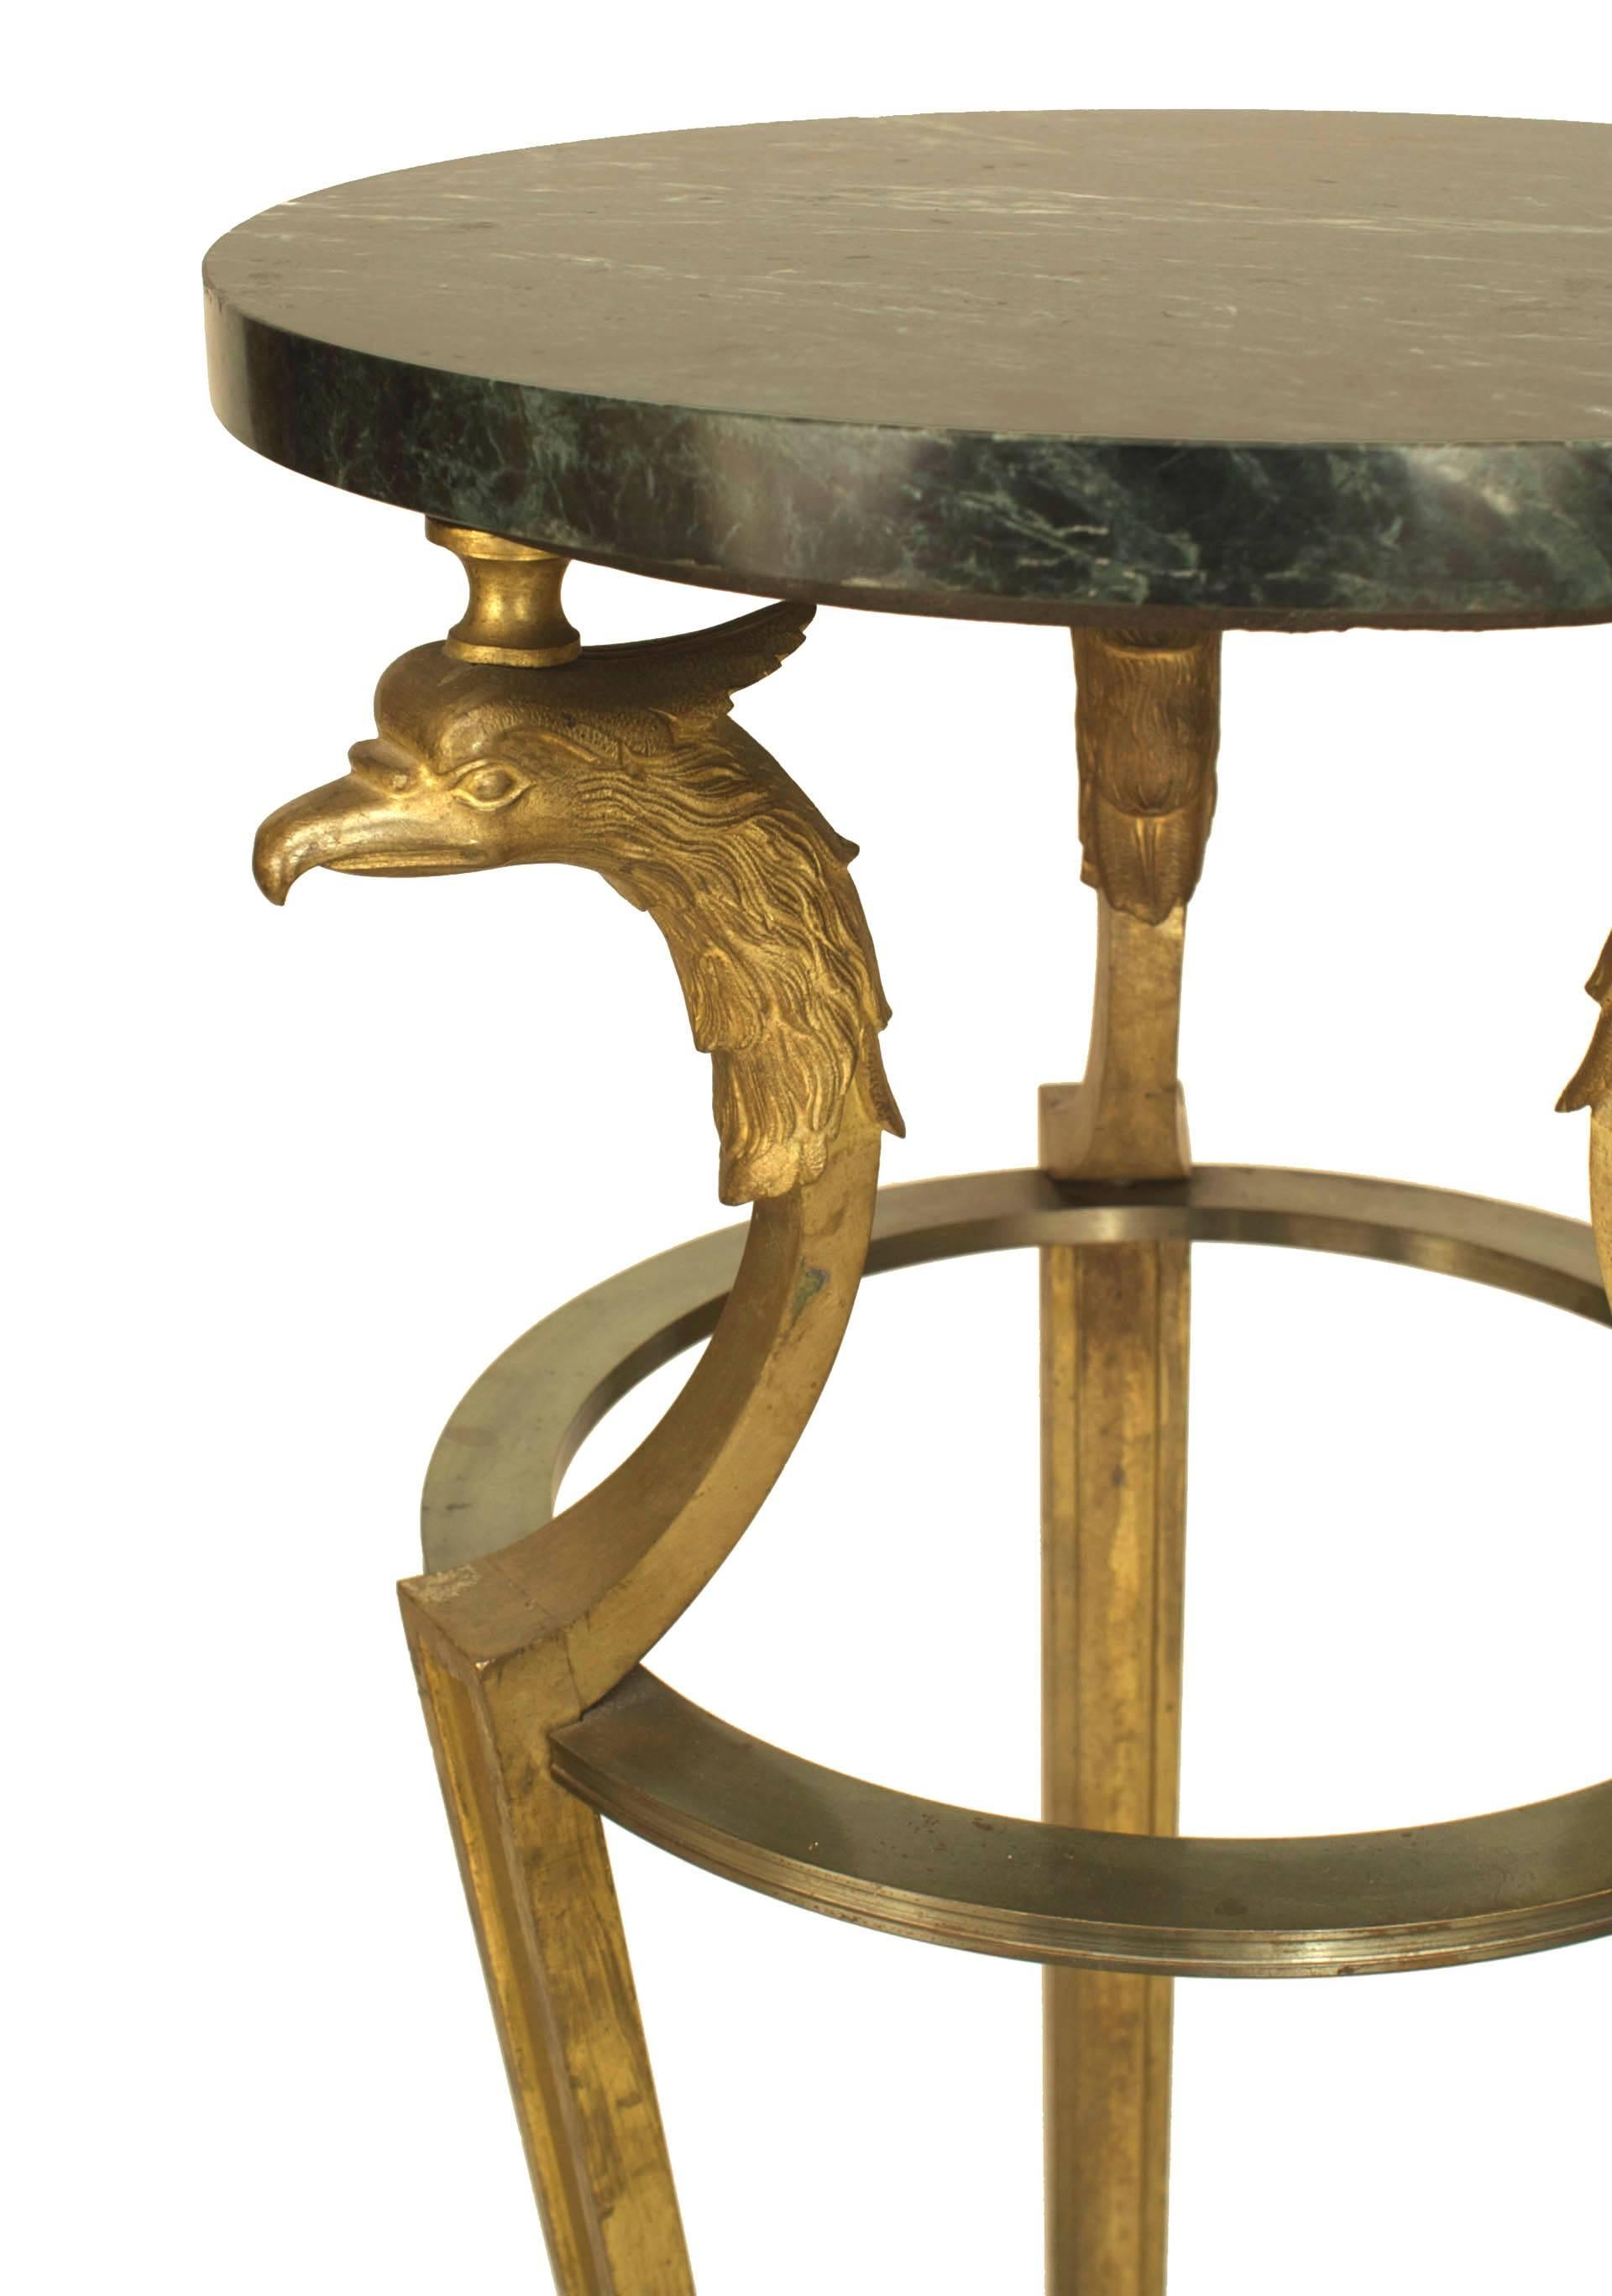 Pair of French Empire Neo-classic style gilt bronze 3 leg pedestals with bird heads supporting a round grey marble top. (Maison Jansen, 1970s)
